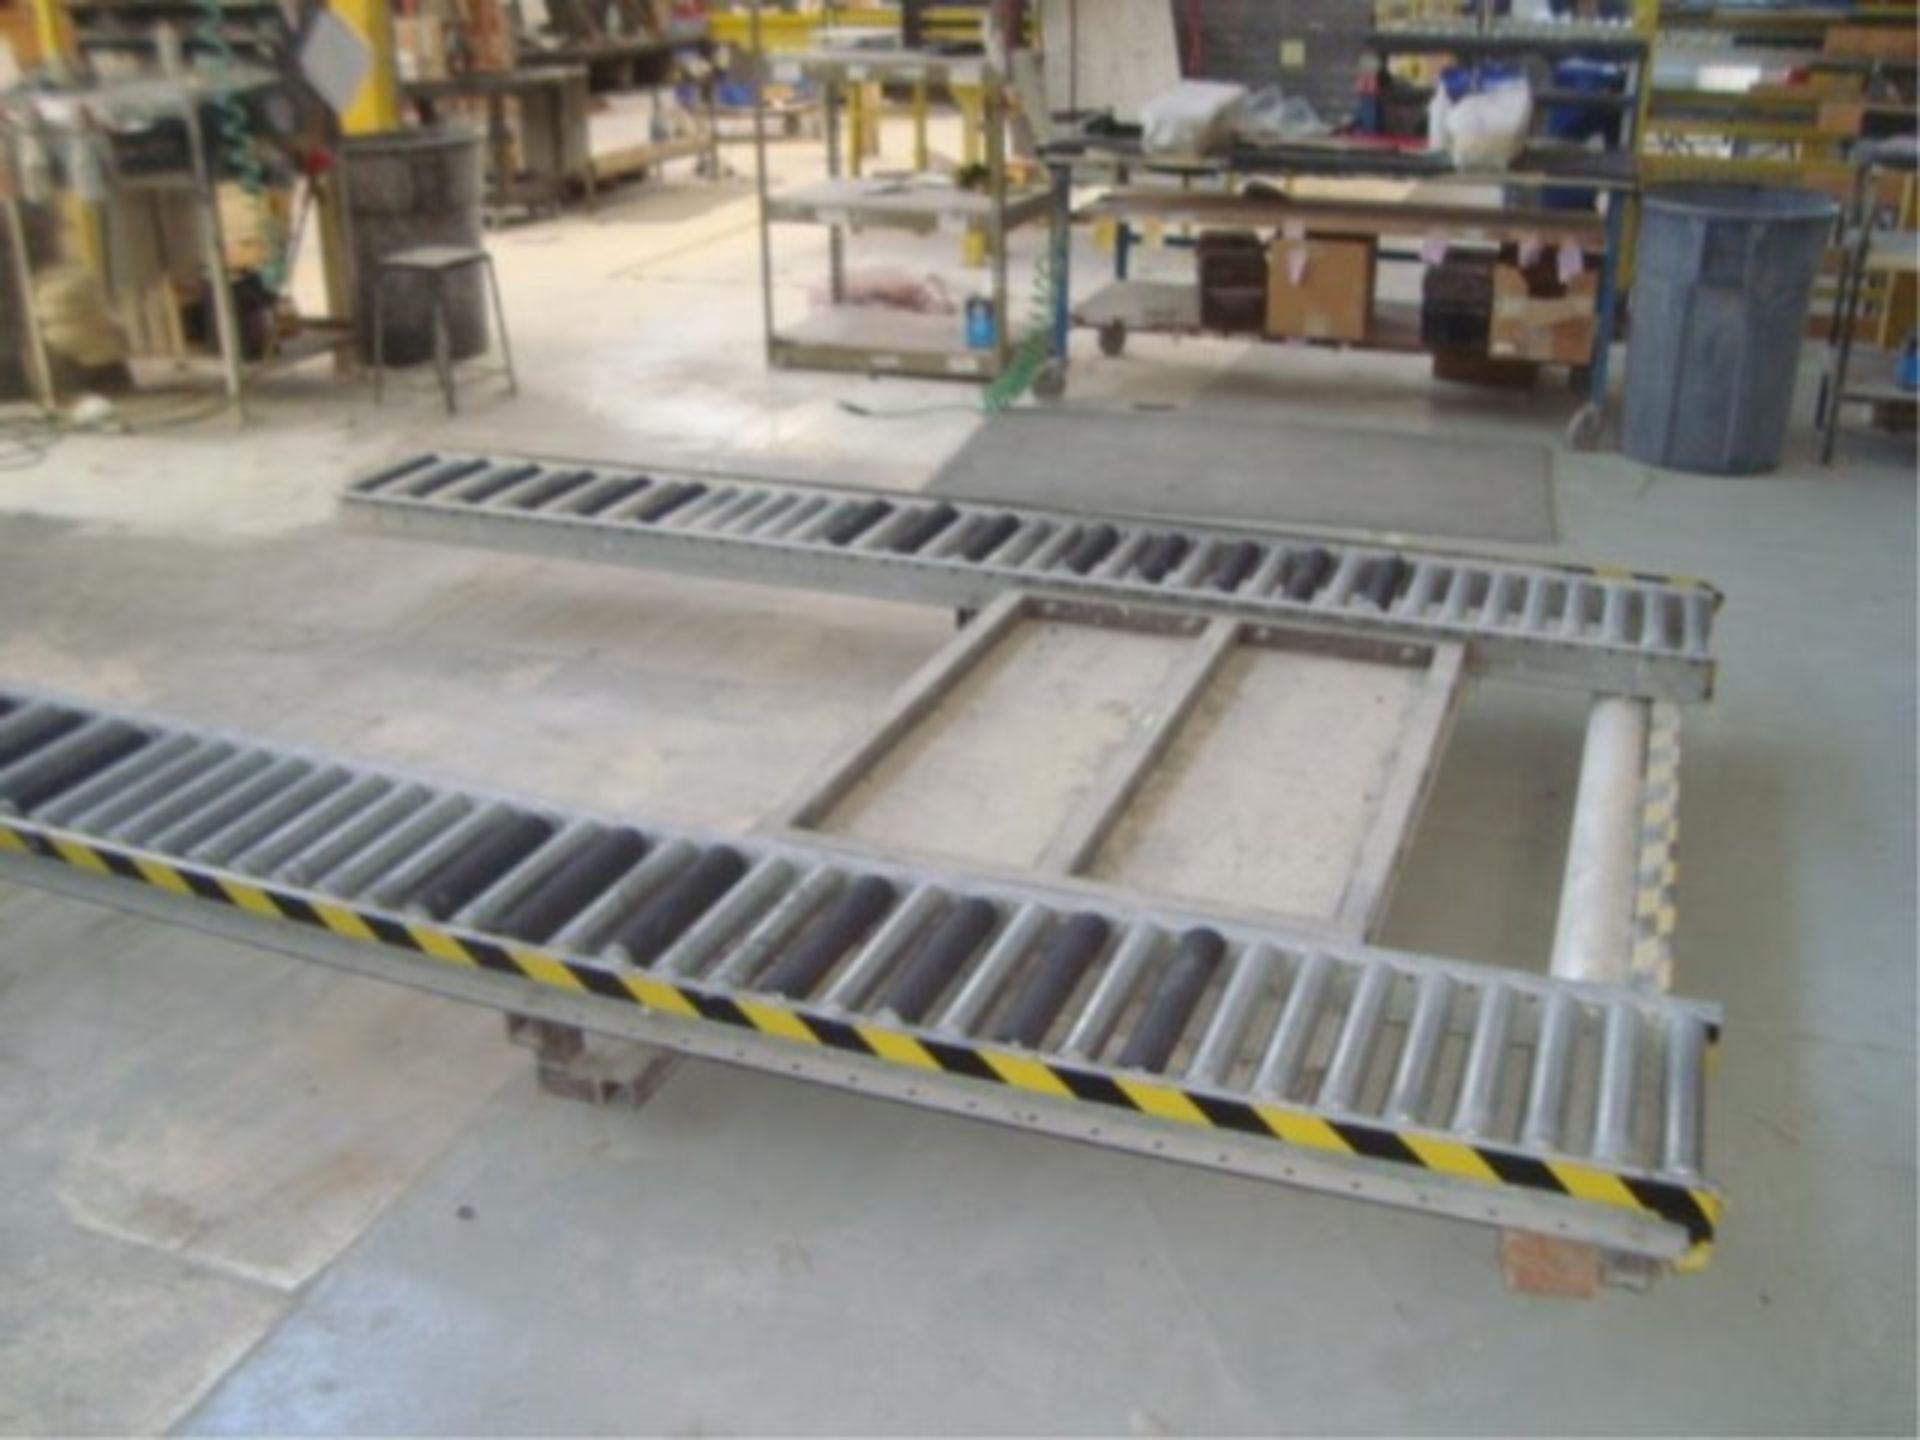 Electric Backsaver Lift Table - Image 9 of 9